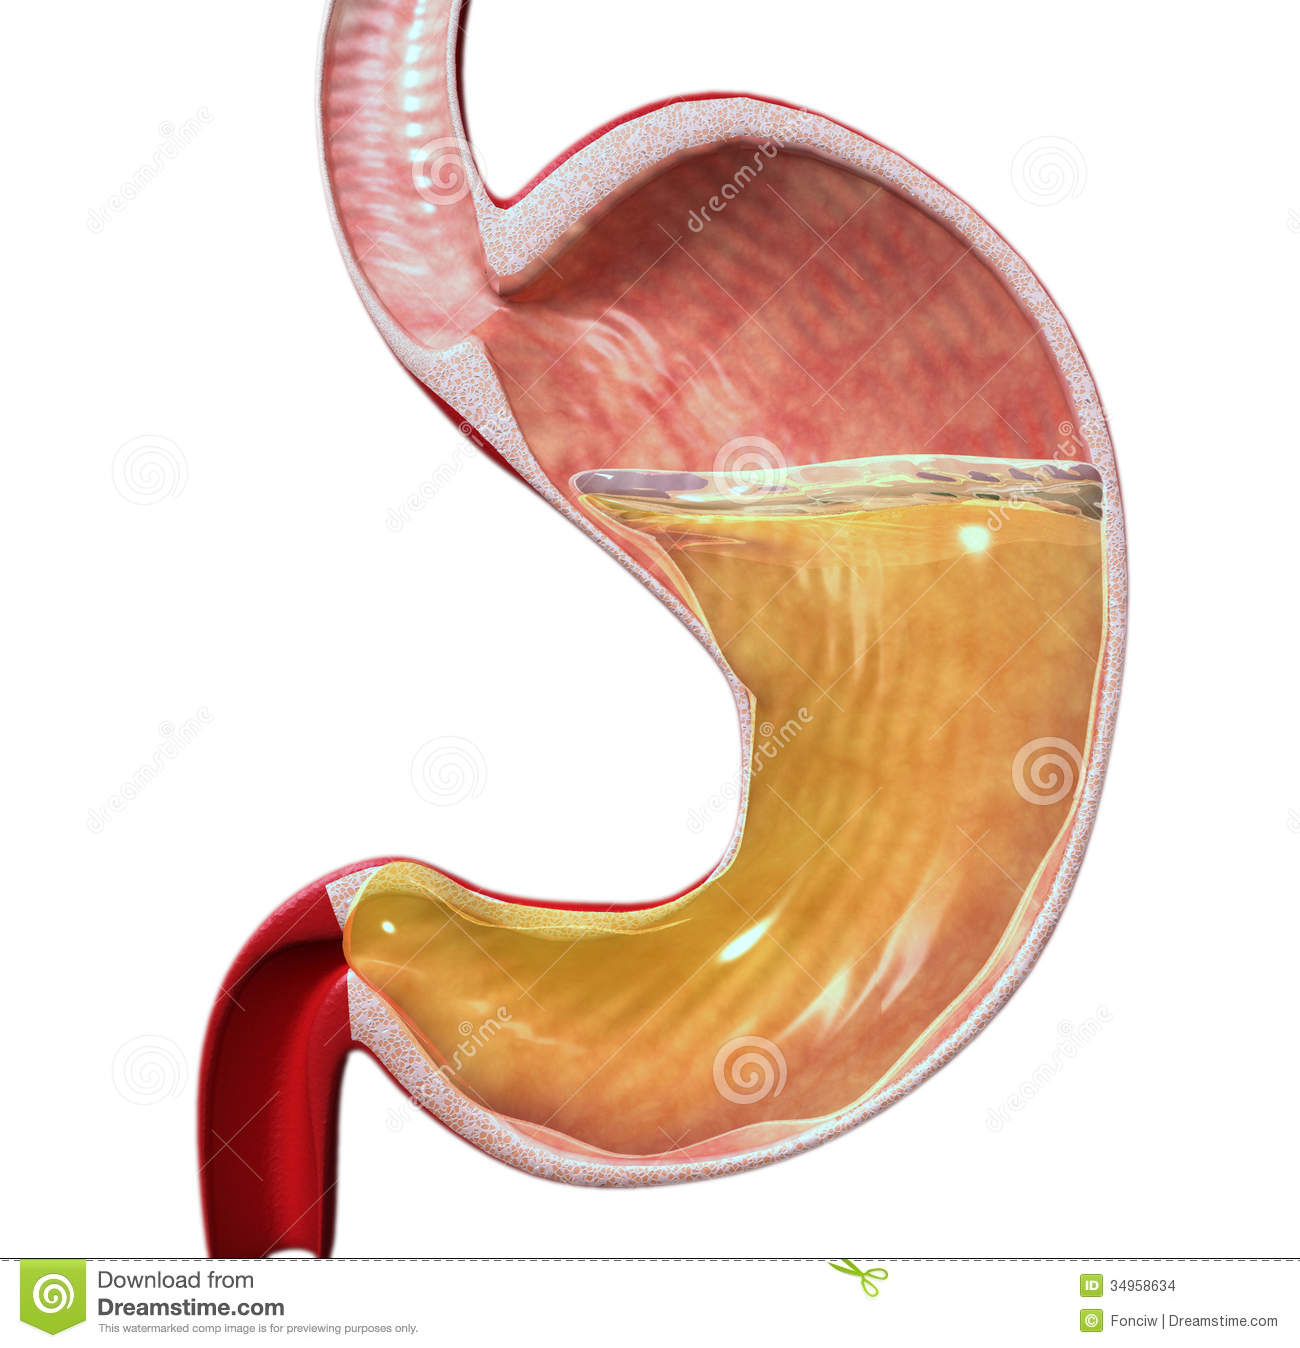 3d Human Stomach With Hydrochloric Acid